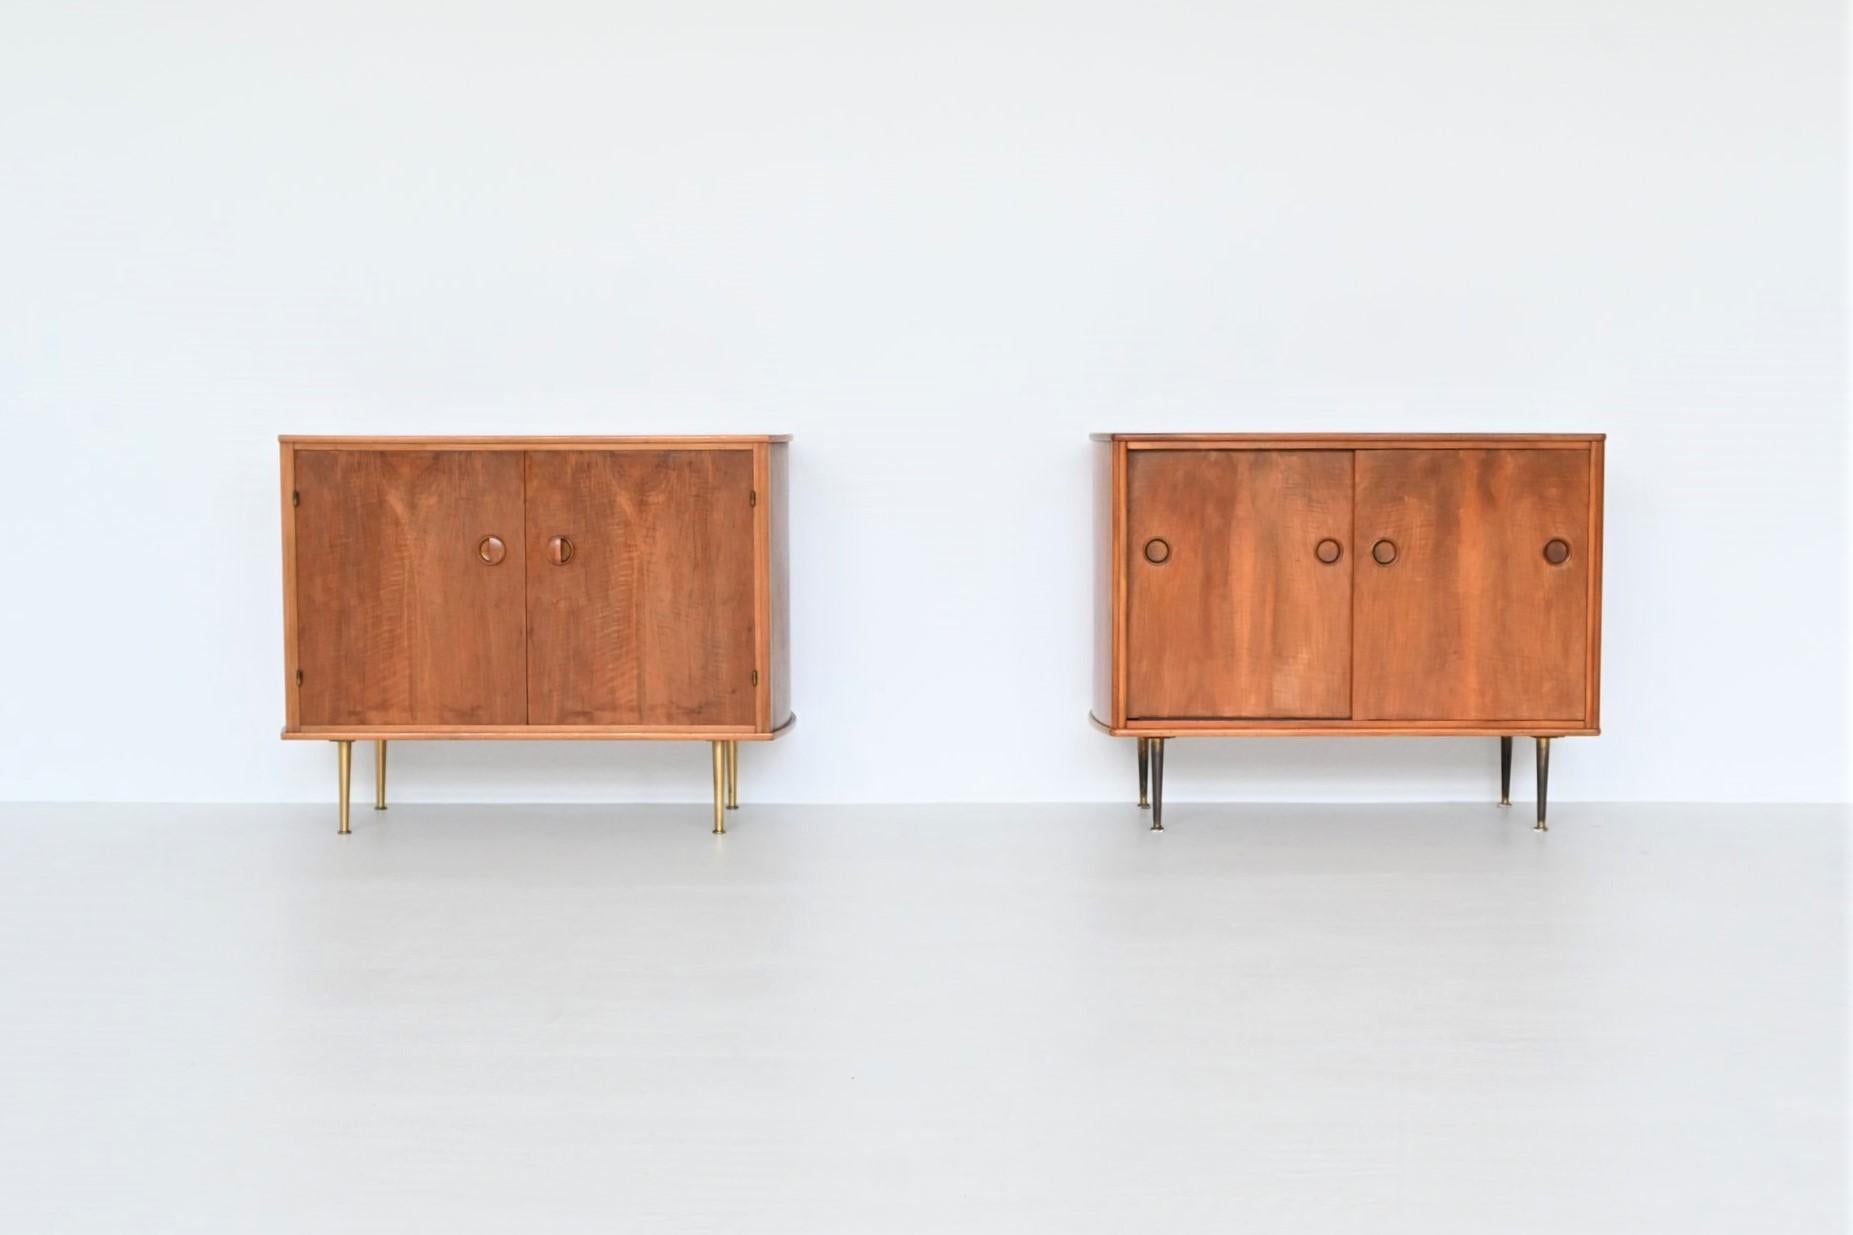 Beautiful pair of cabinets designed by William Watting and manufactured by Fristho Franeker, The Netherlands 1960. These nicely refined cabinets are made of high quality walnut wood and have a beautiful warm grain to the veneer. One has two sliding